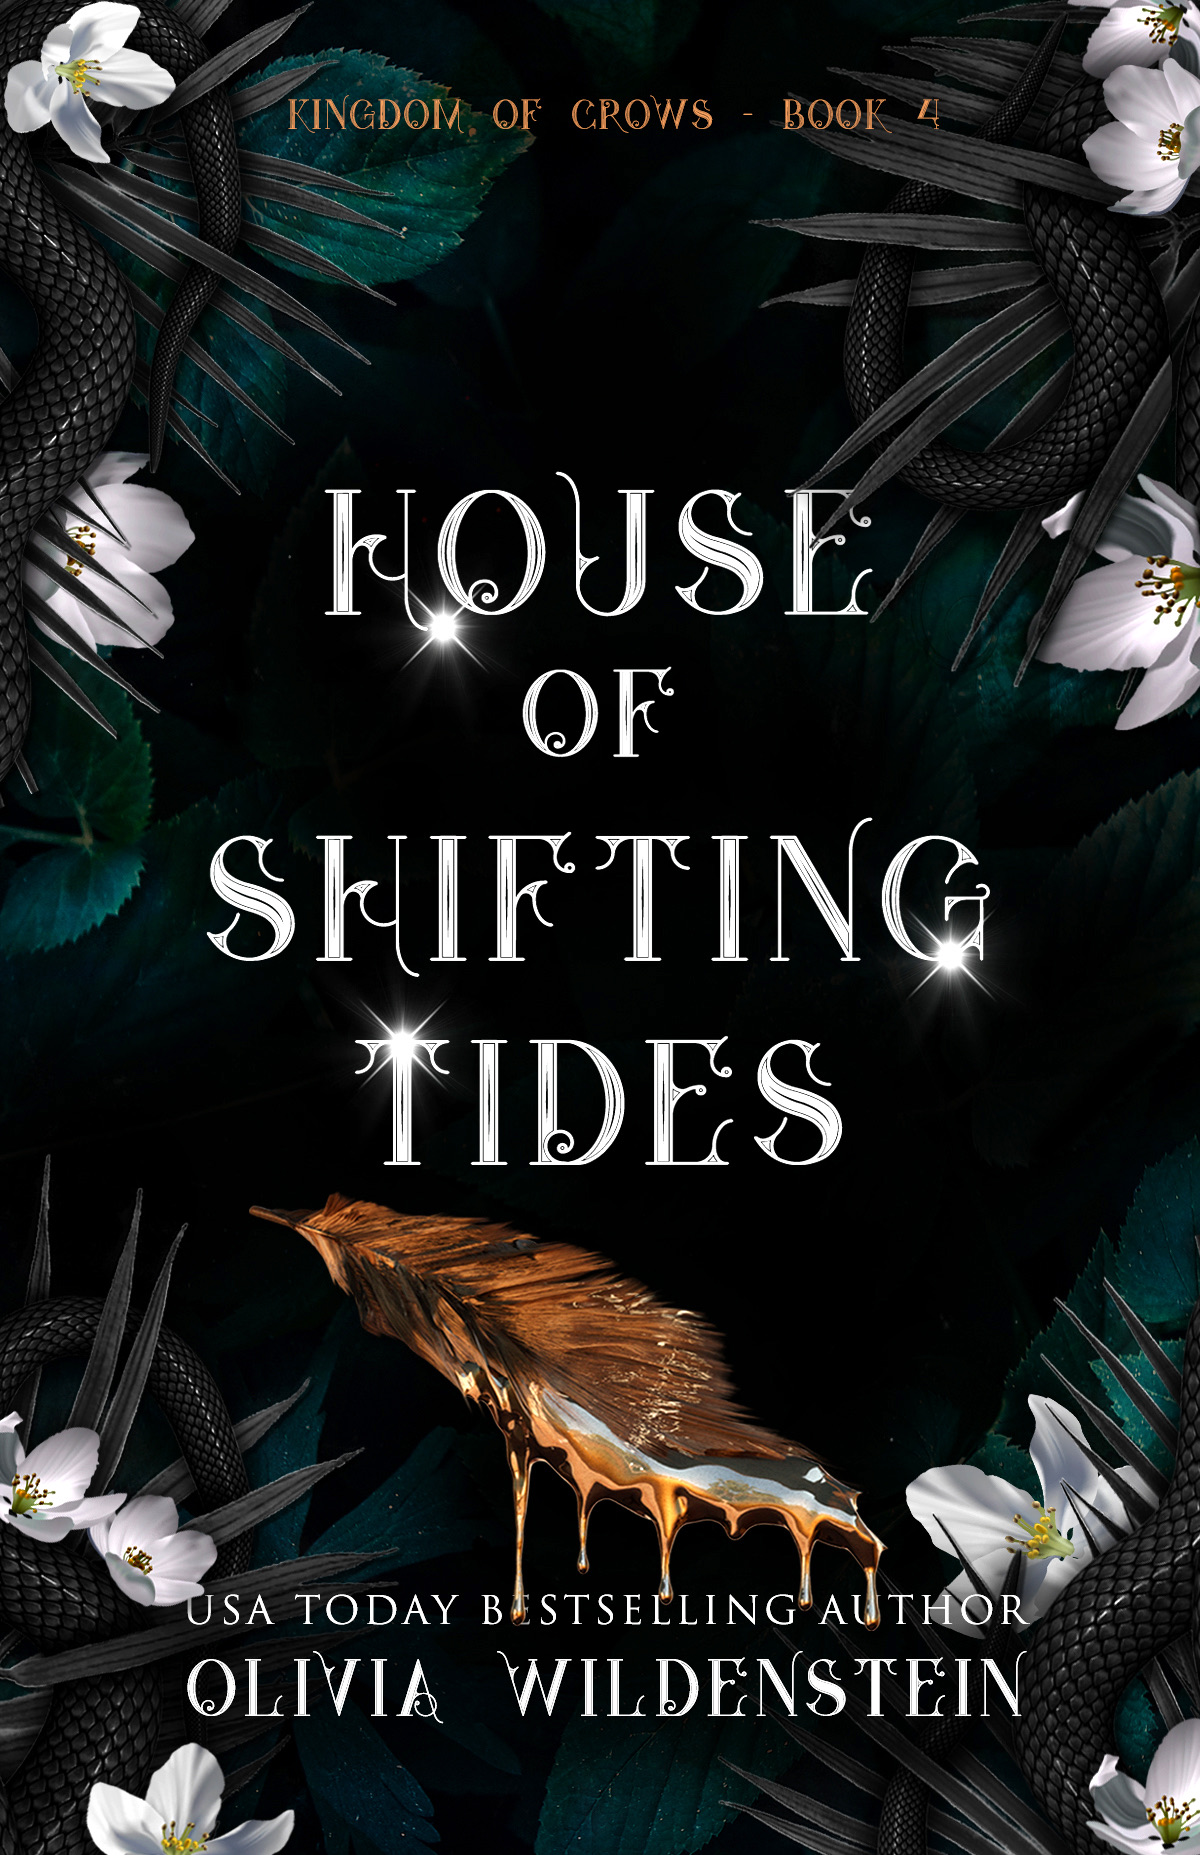 House of Shifting Tides by Olivia Wildenstein